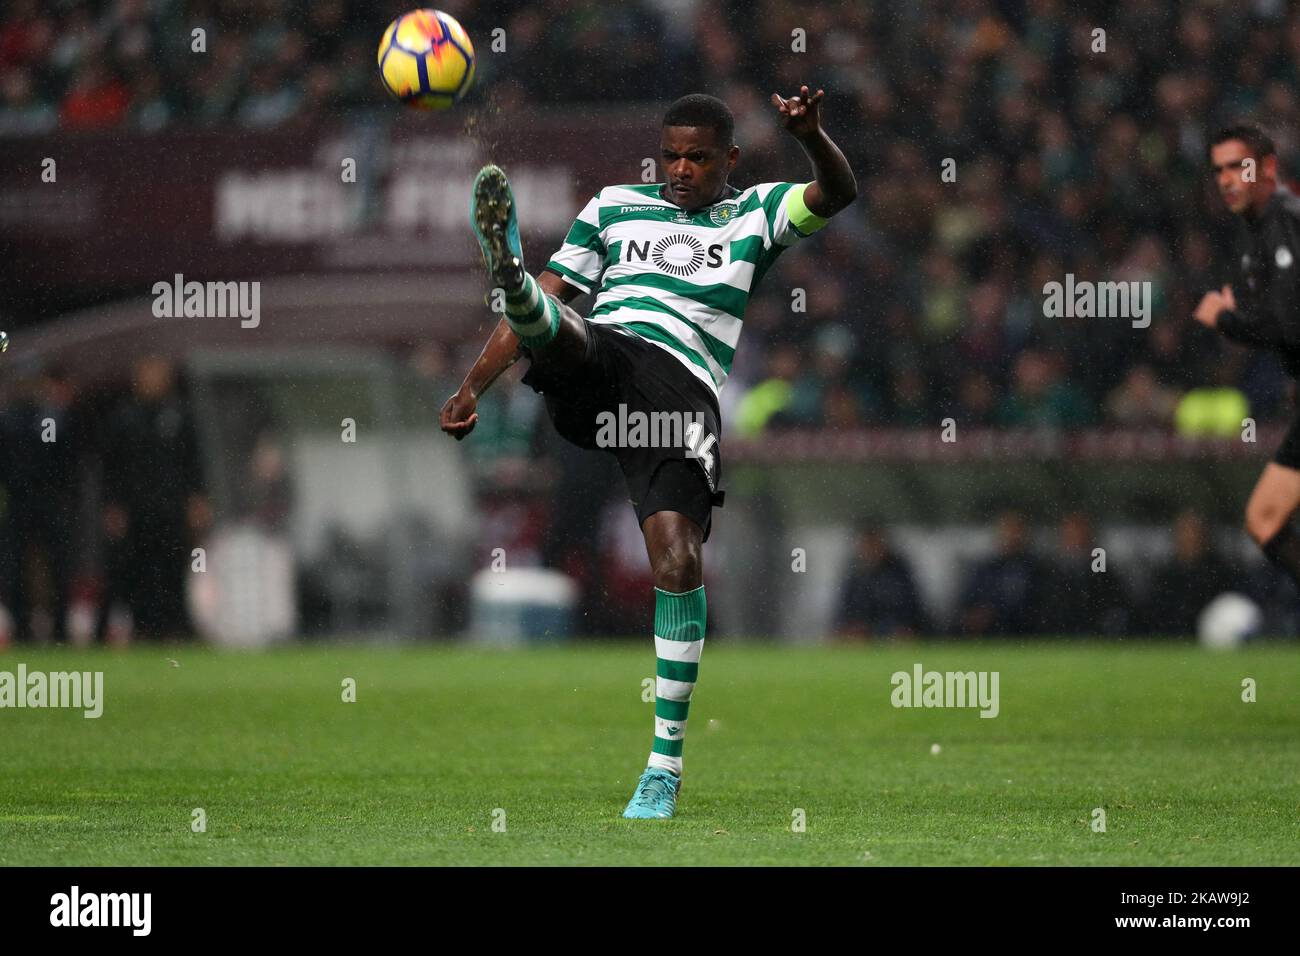 Sporting's Portuguese midfielder William Carvalho in action during the Portuguese League Cup 2017/18 match between Sporting CP and FC Porto, at Municipal de Braga Stadium in Braga on January 24, 2018. (Photo by Paulo Oliveira / DPI / NurPhoto) Stock Photo